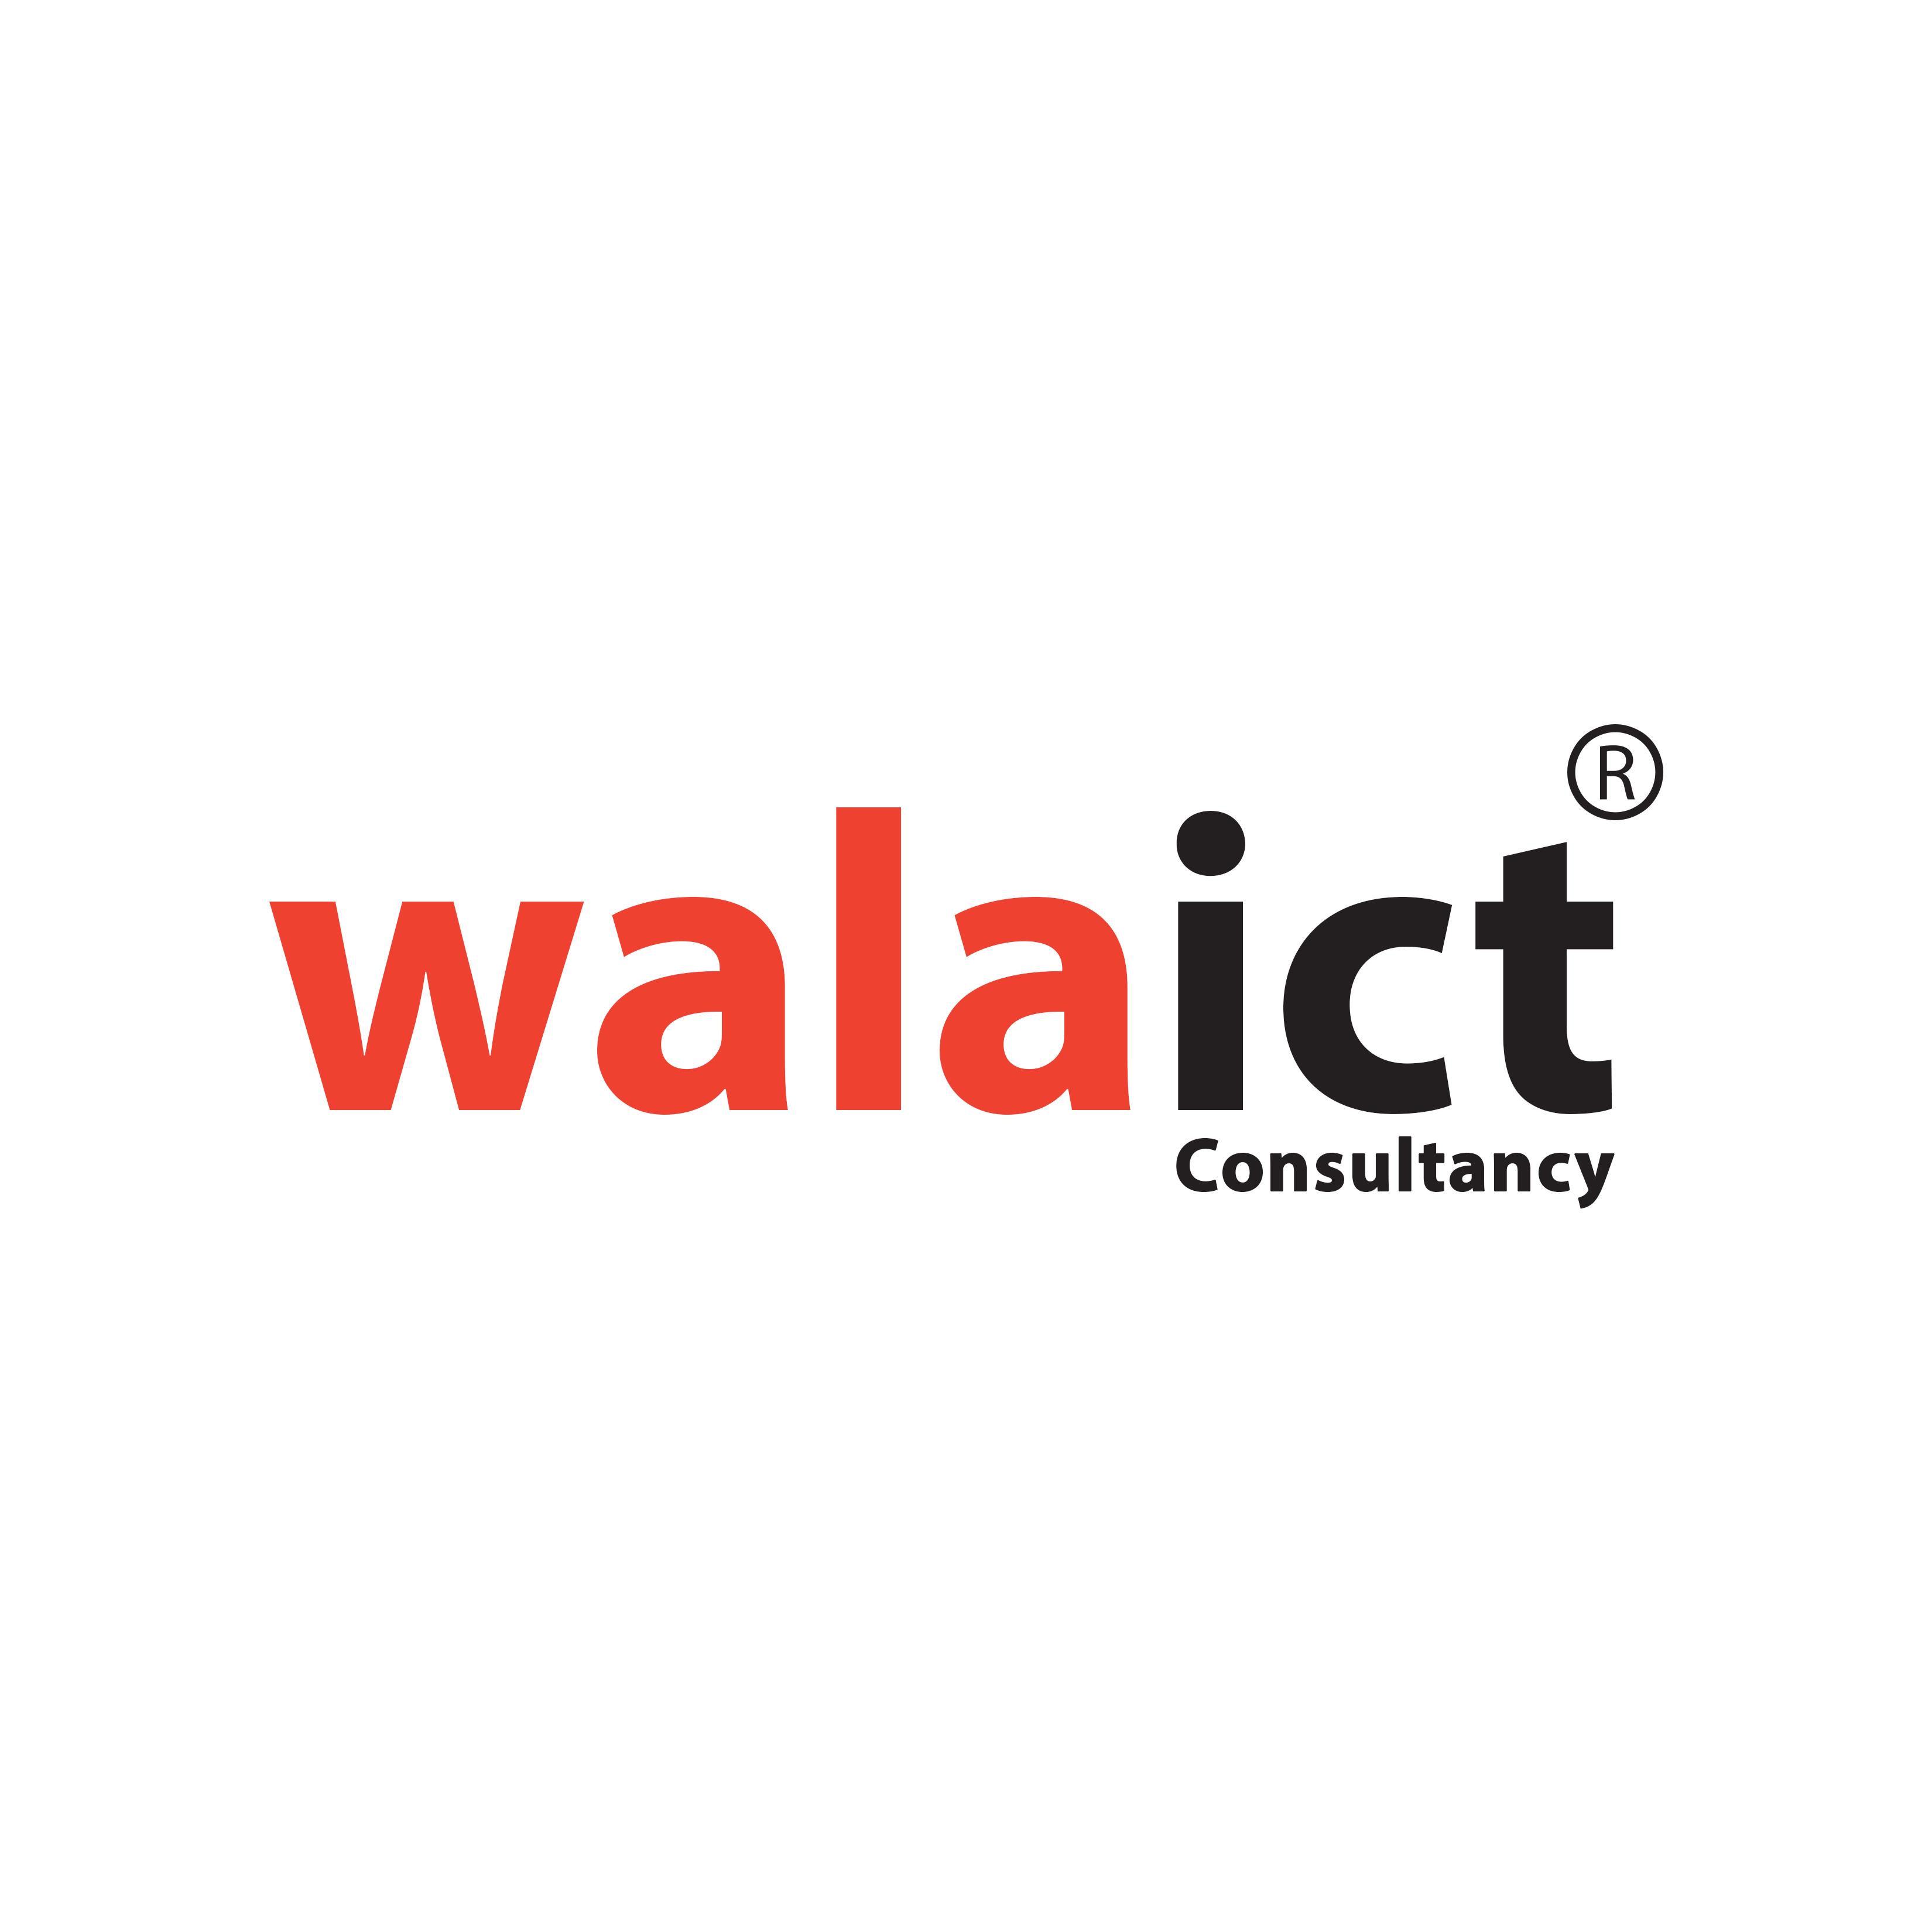 Wala ICT Consultancy profile on Qualified.One